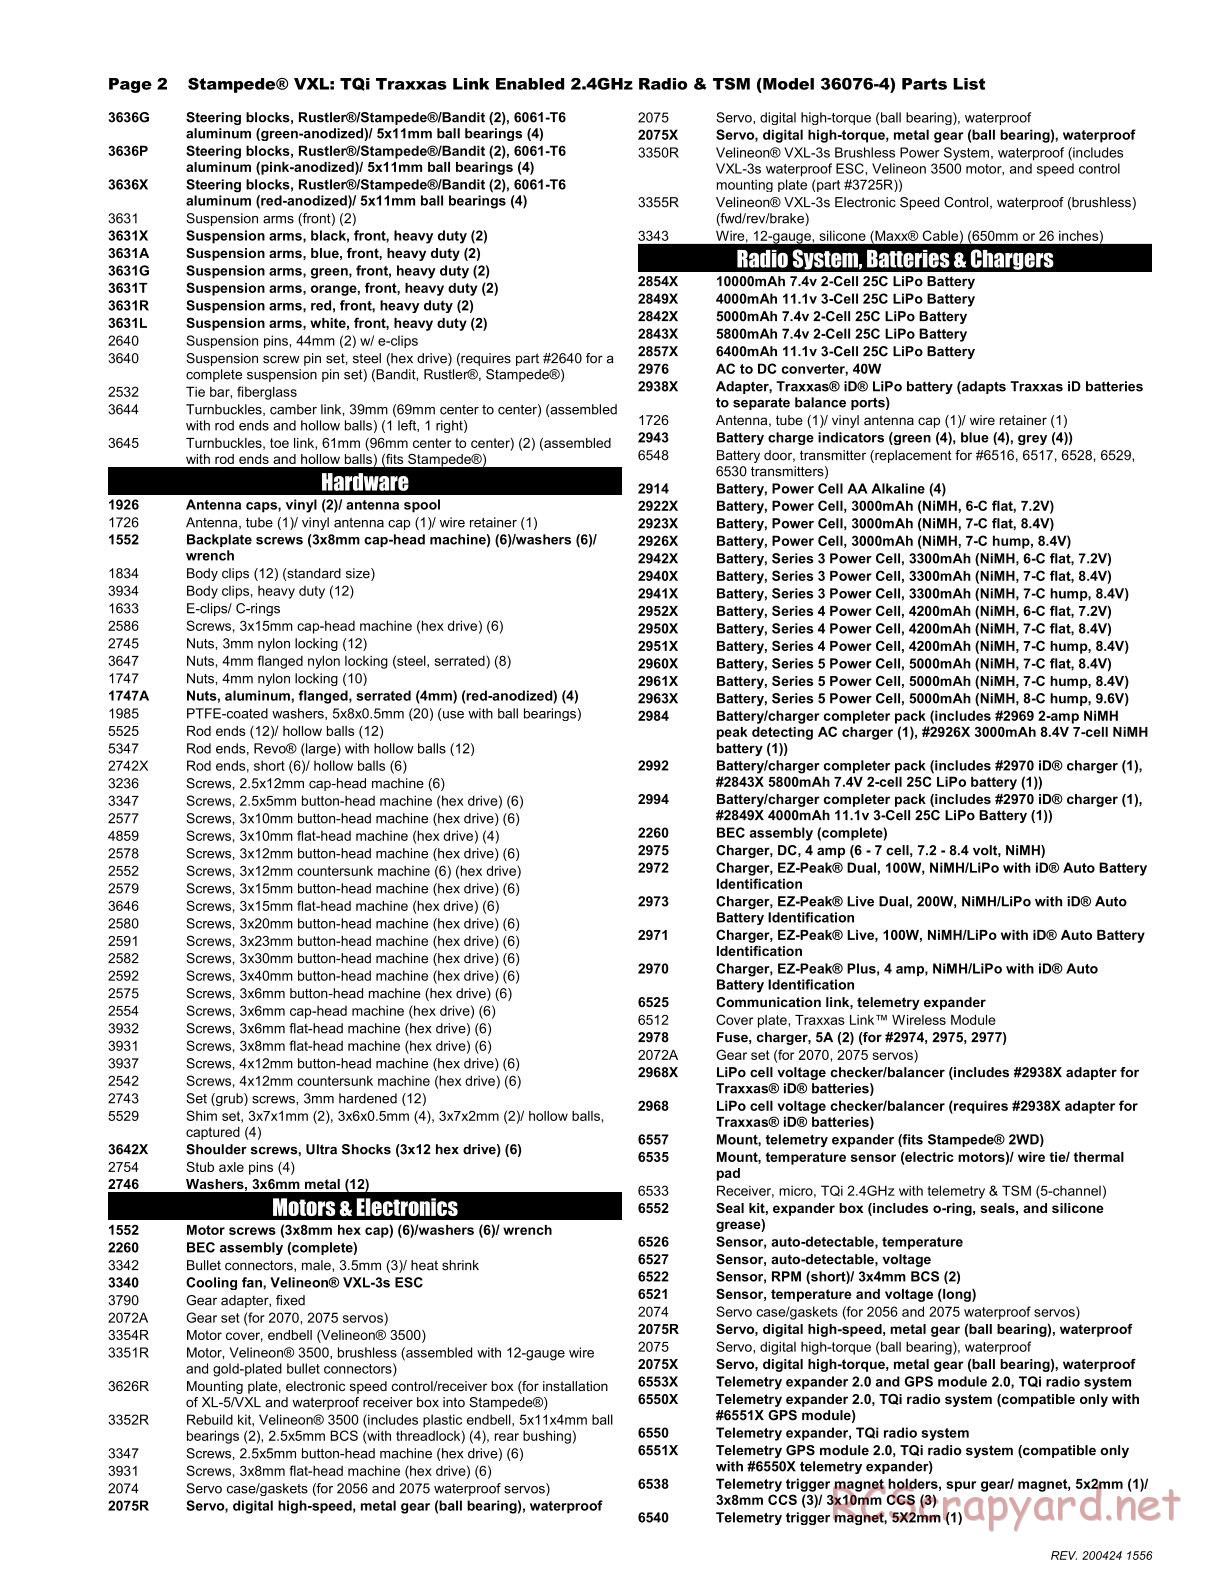 Traxxas - Stampede VXL TSM Rock n' Roll (2017) - Parts List - Page 2